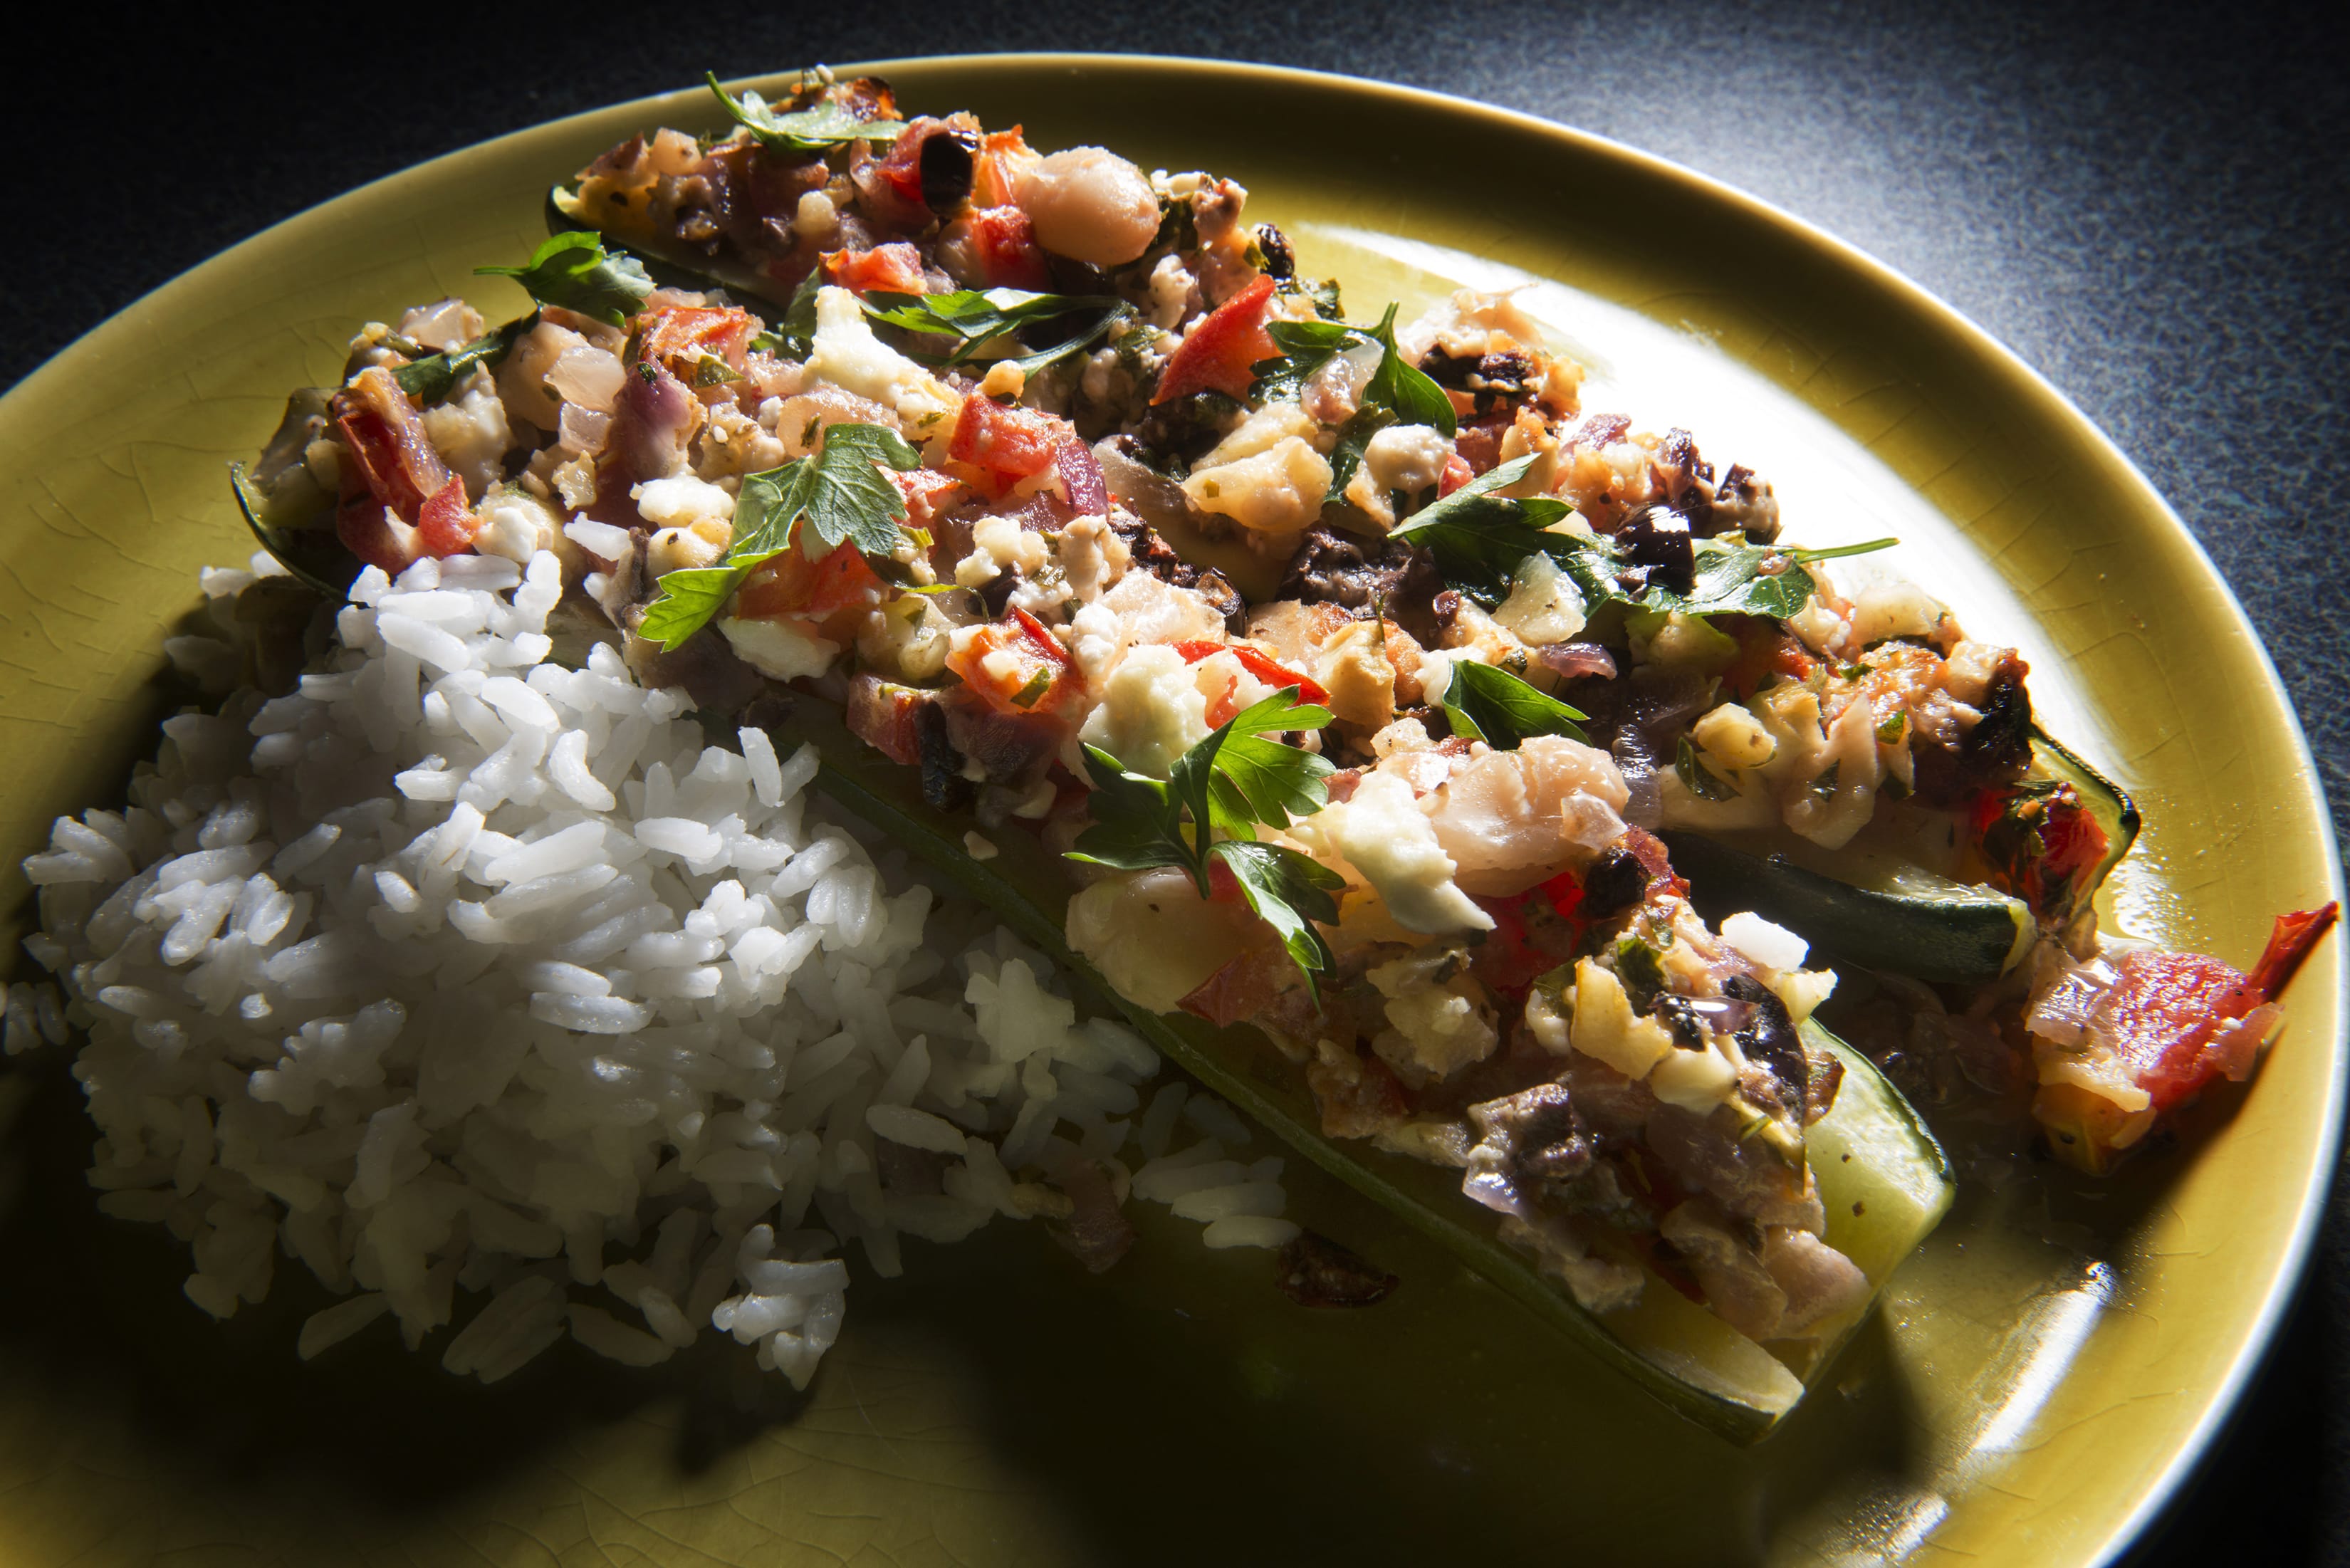 Stuffed Zucchini: Serve with rice or another grain of your choice.